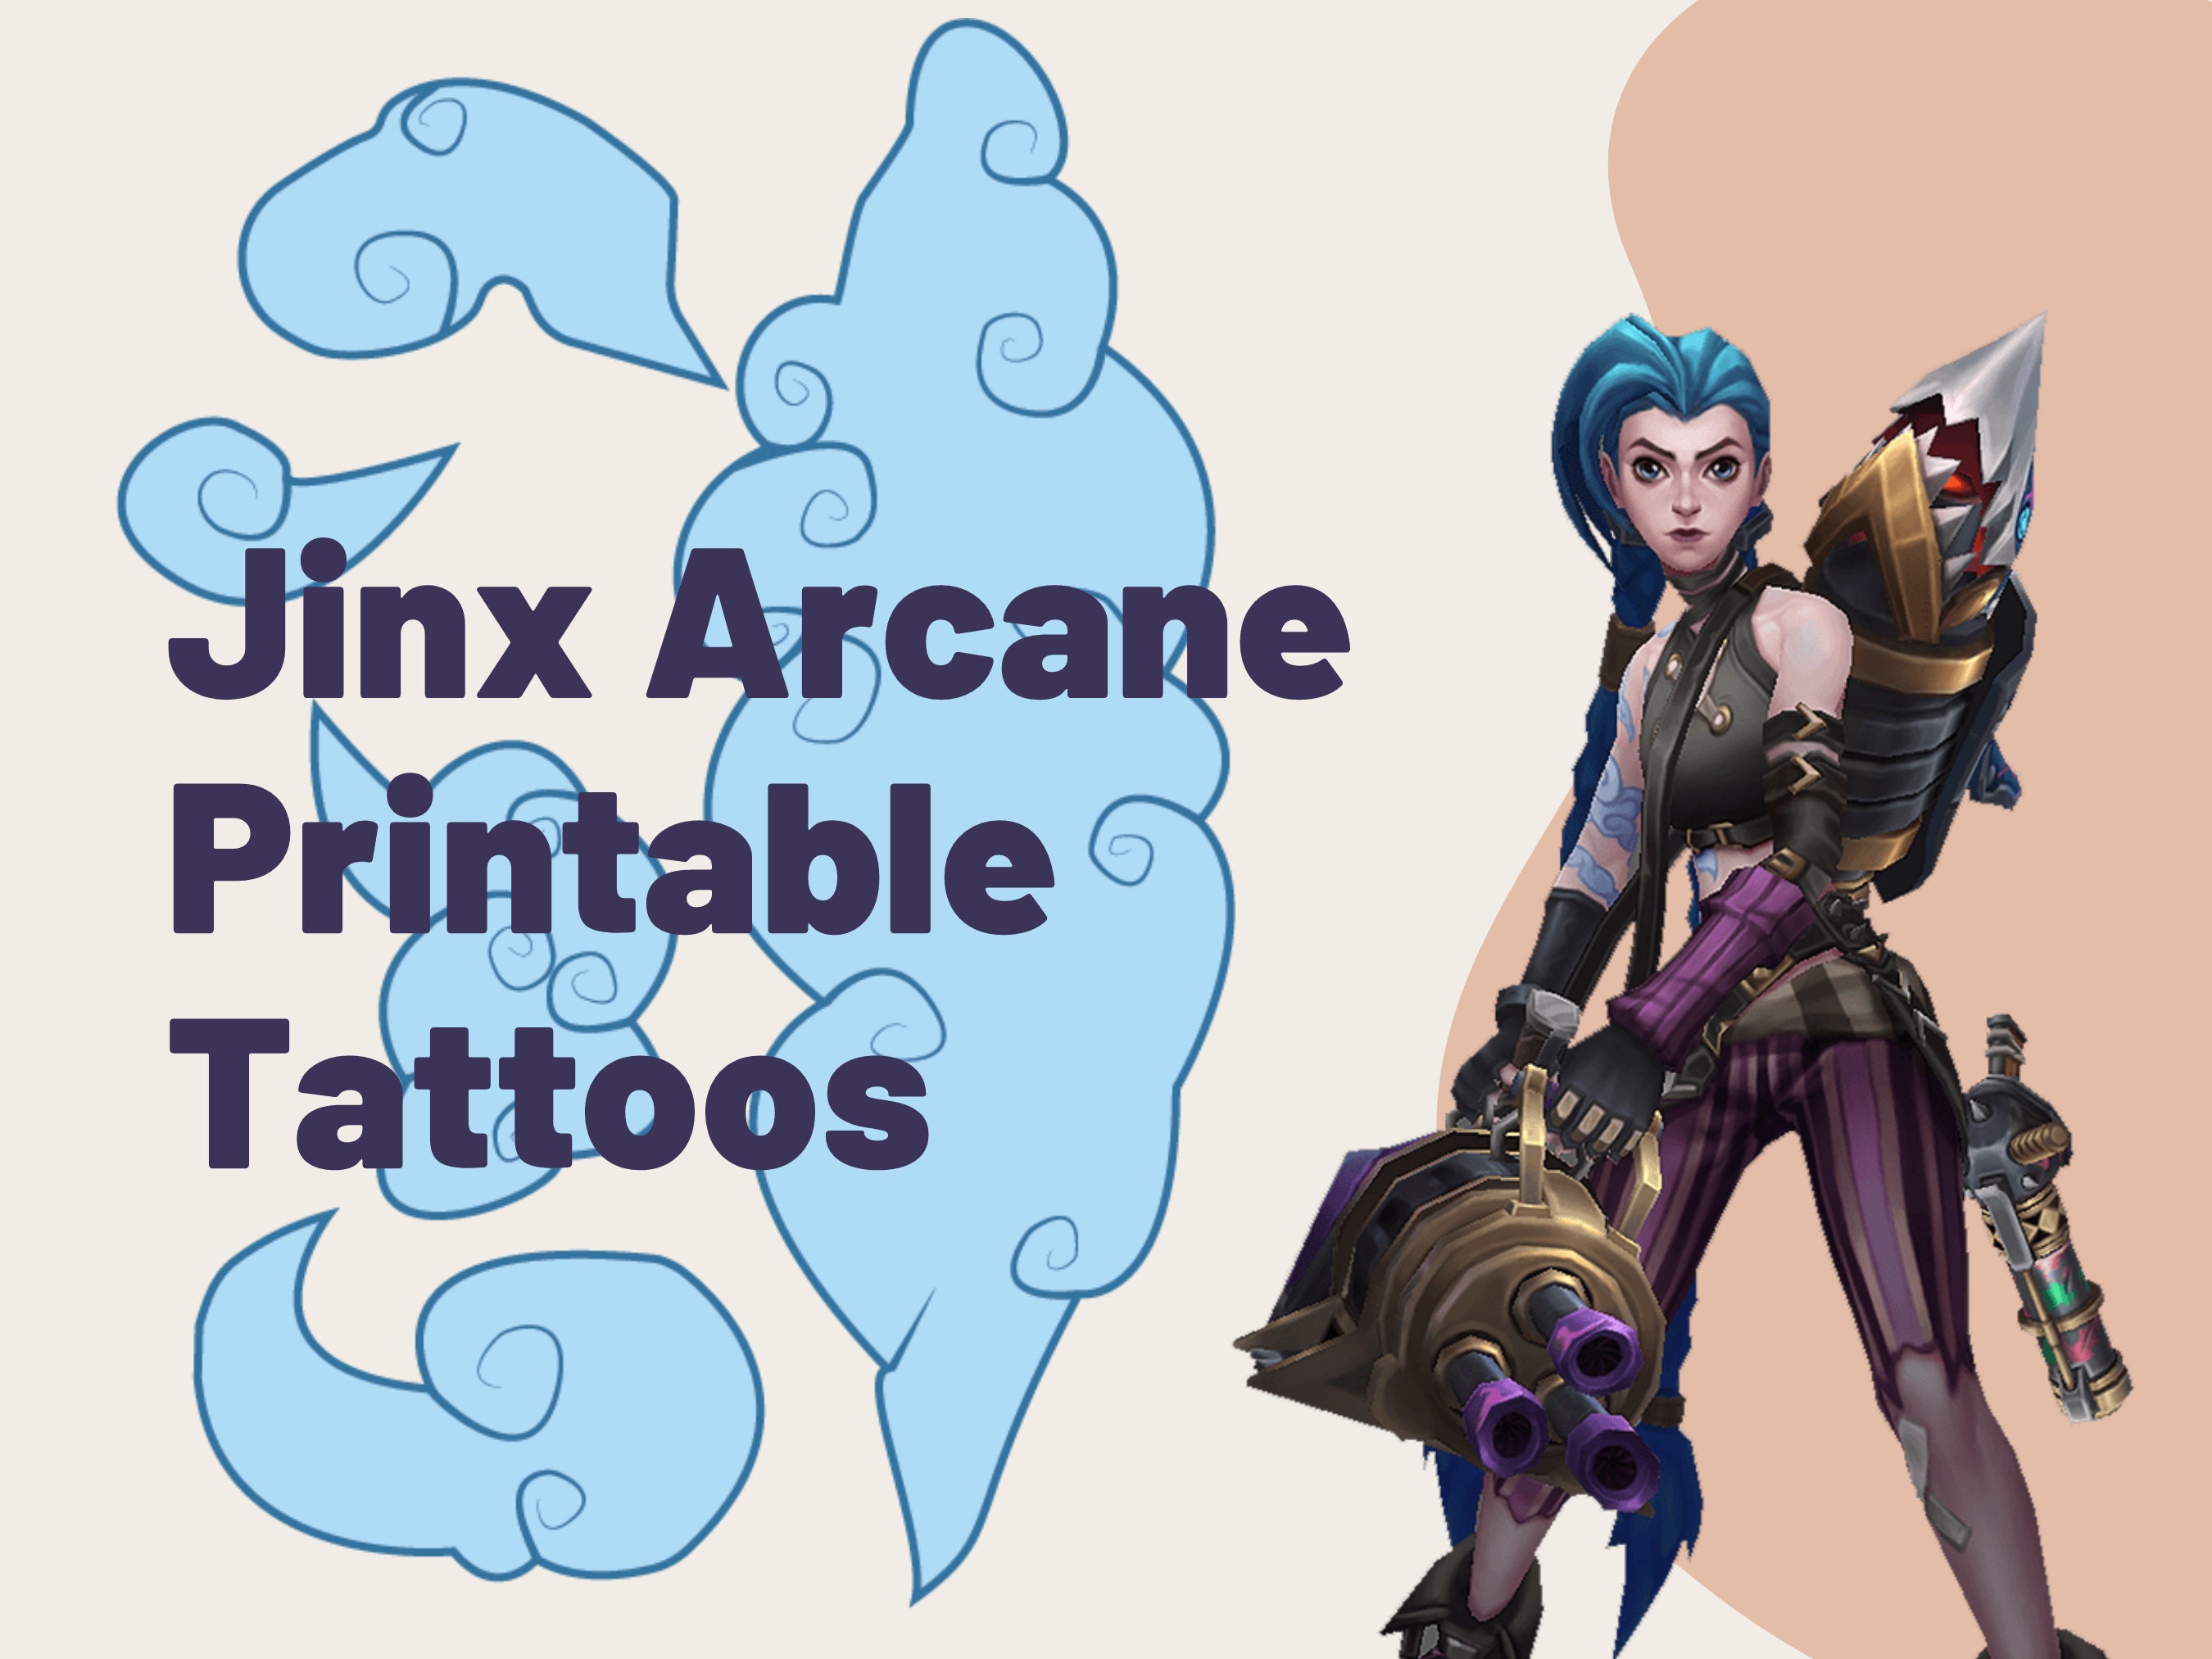 Arcane Jinx Printable Tattoos Print At Home Tattoos League Of Legends Cosplay Etsy 日本